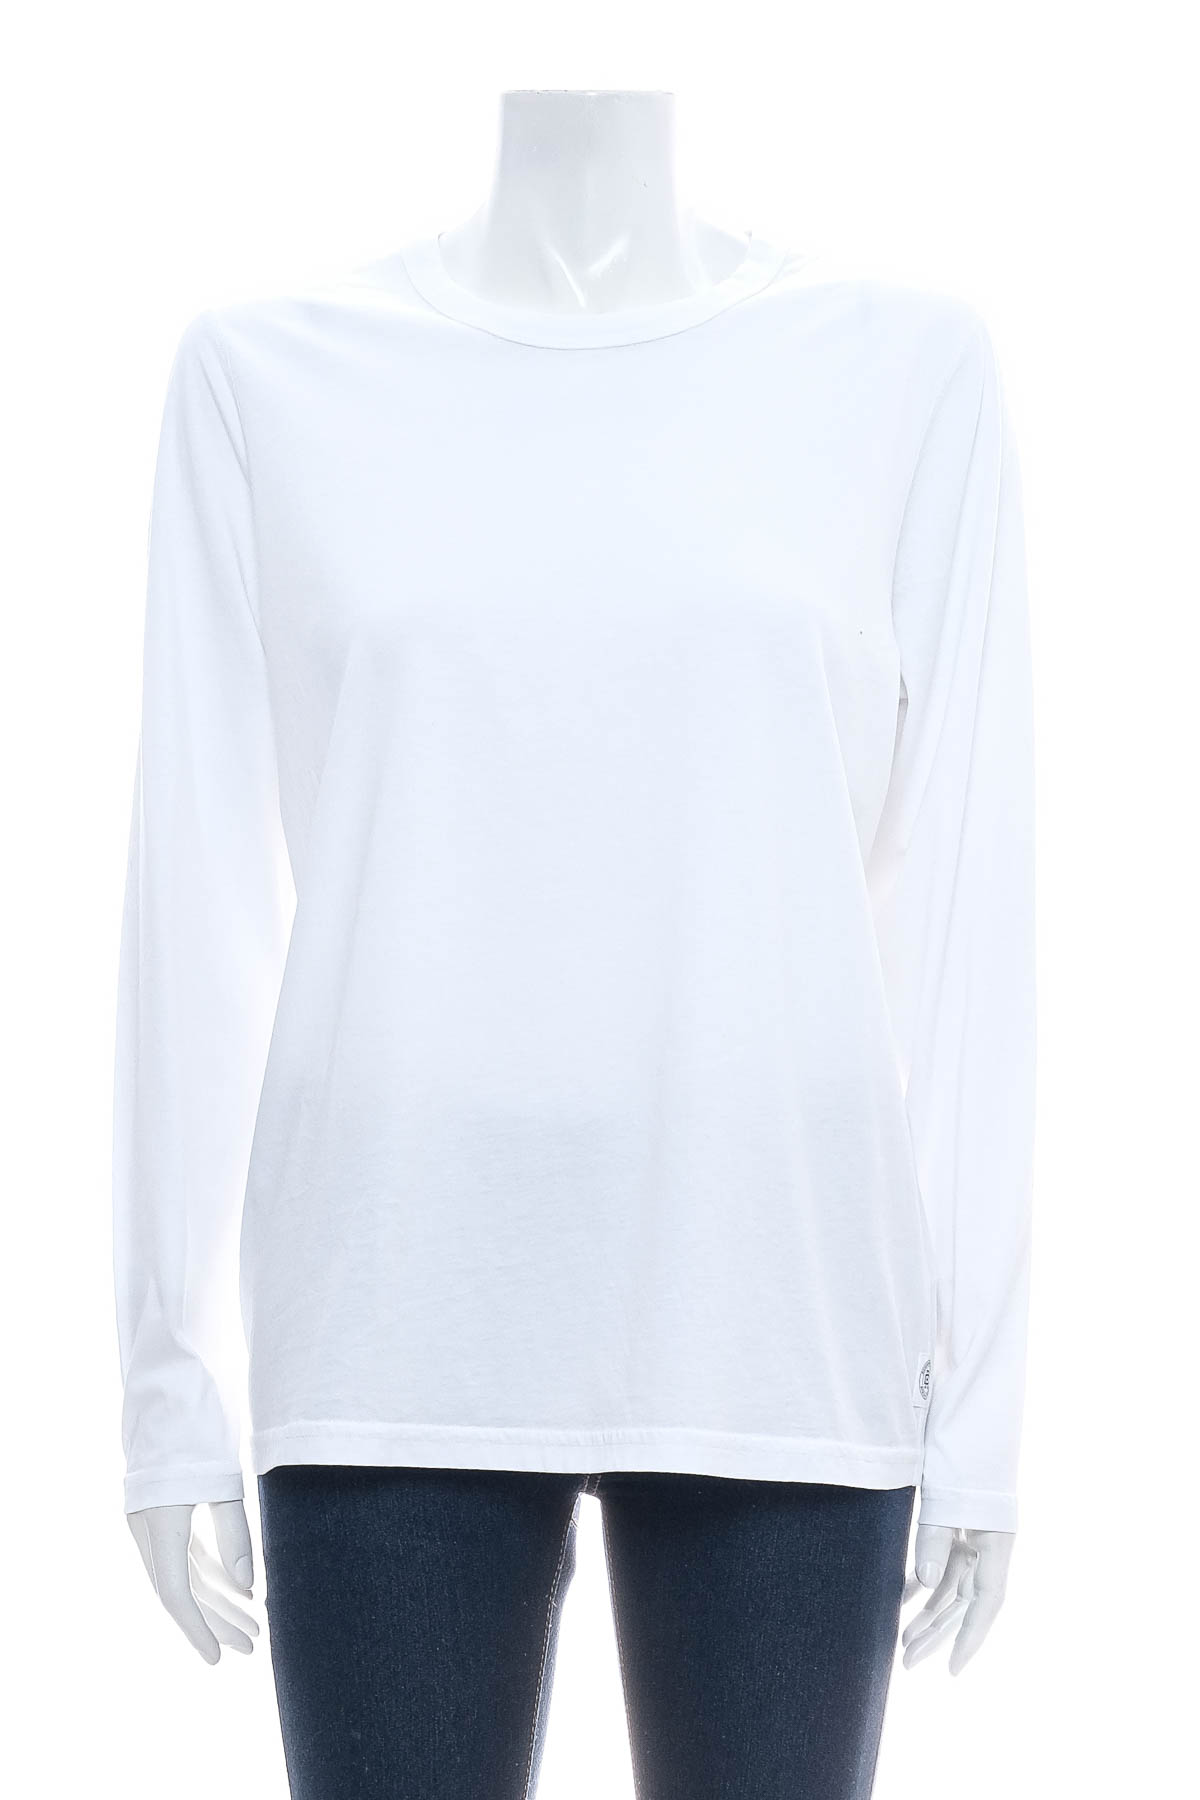 Women's blouse - Reigning Champ - 0